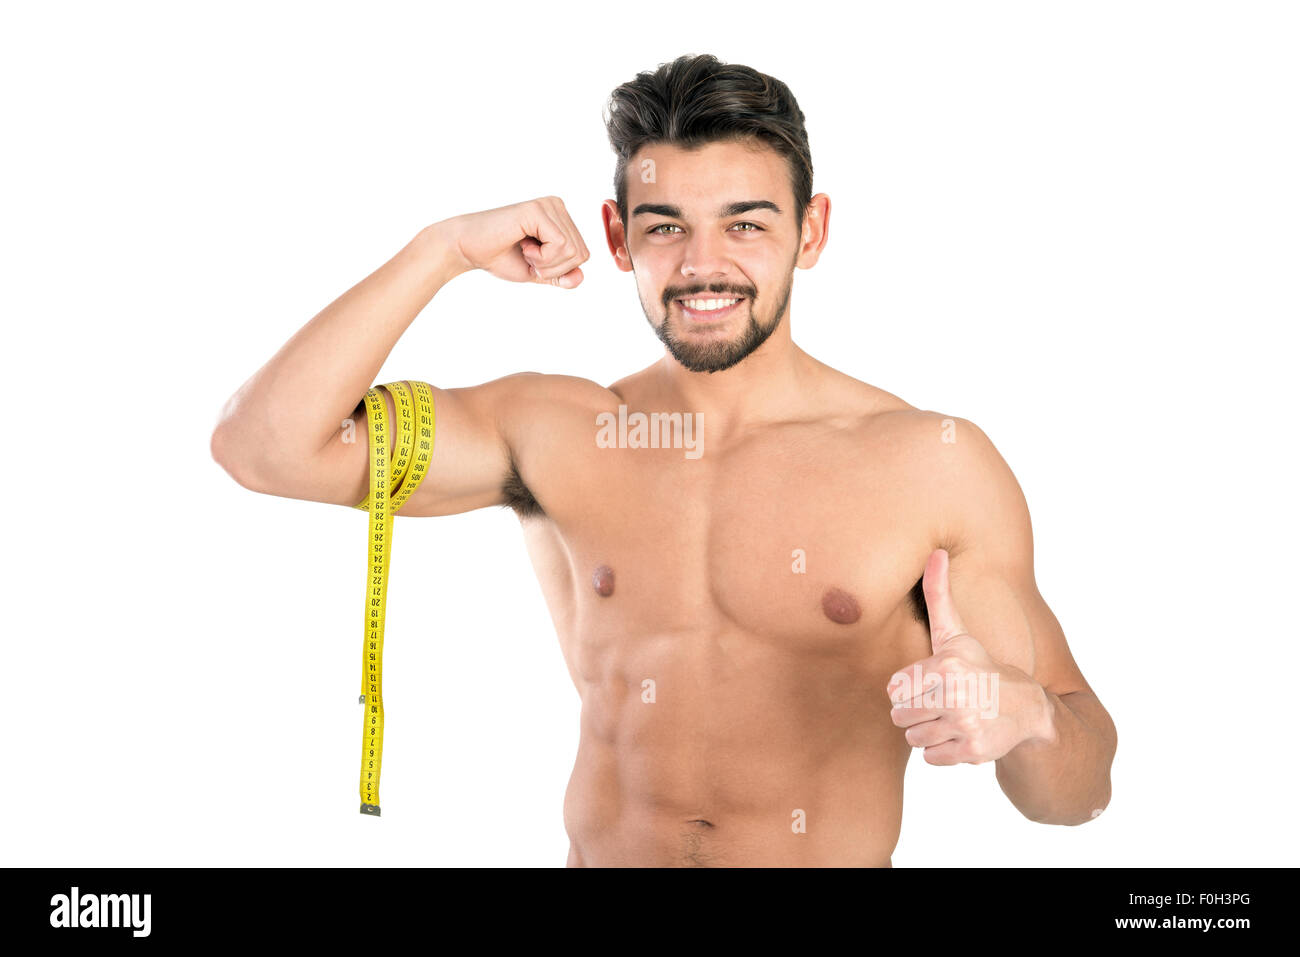 Image of muscular man measure his waist with measuring tape in centimeters  Stock Photo - Alamy